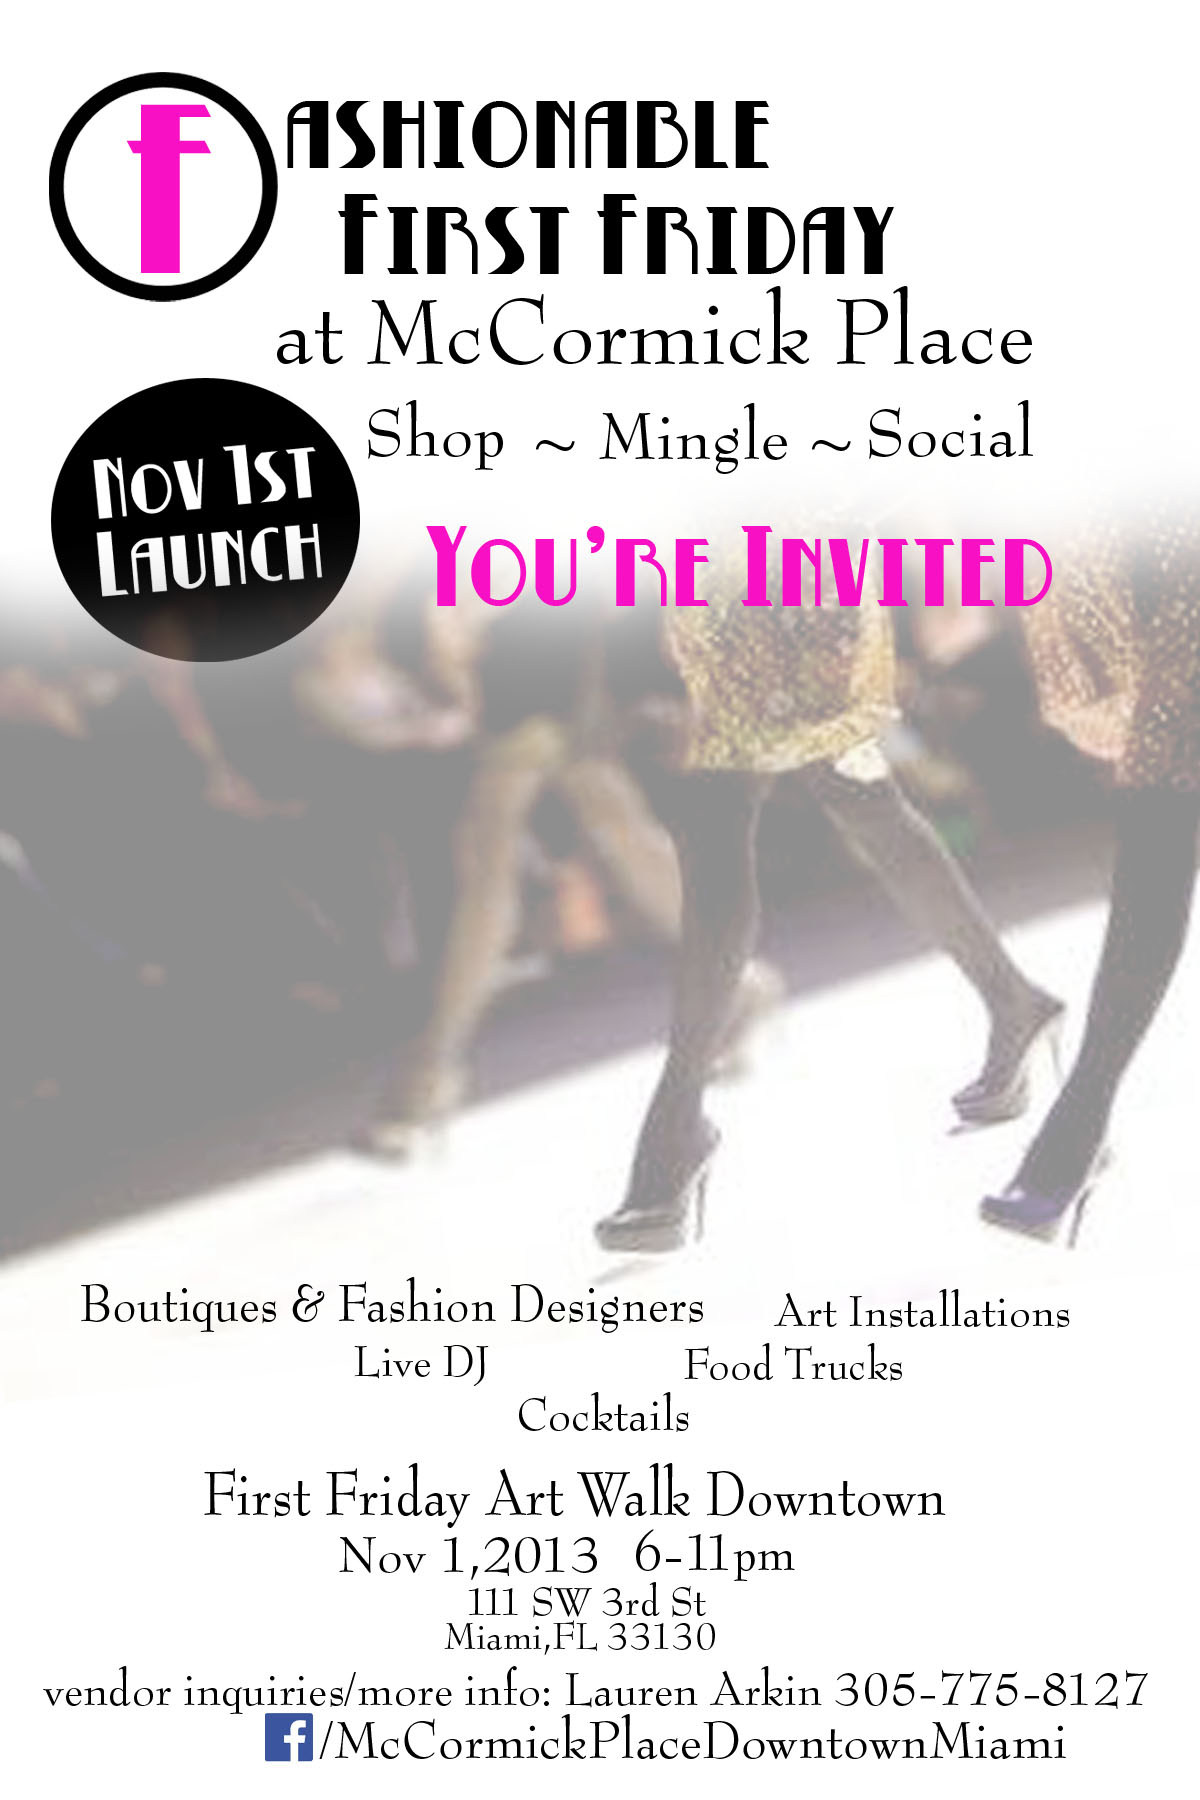 Fashionable First Friday at McCormick Place Miami November 1st